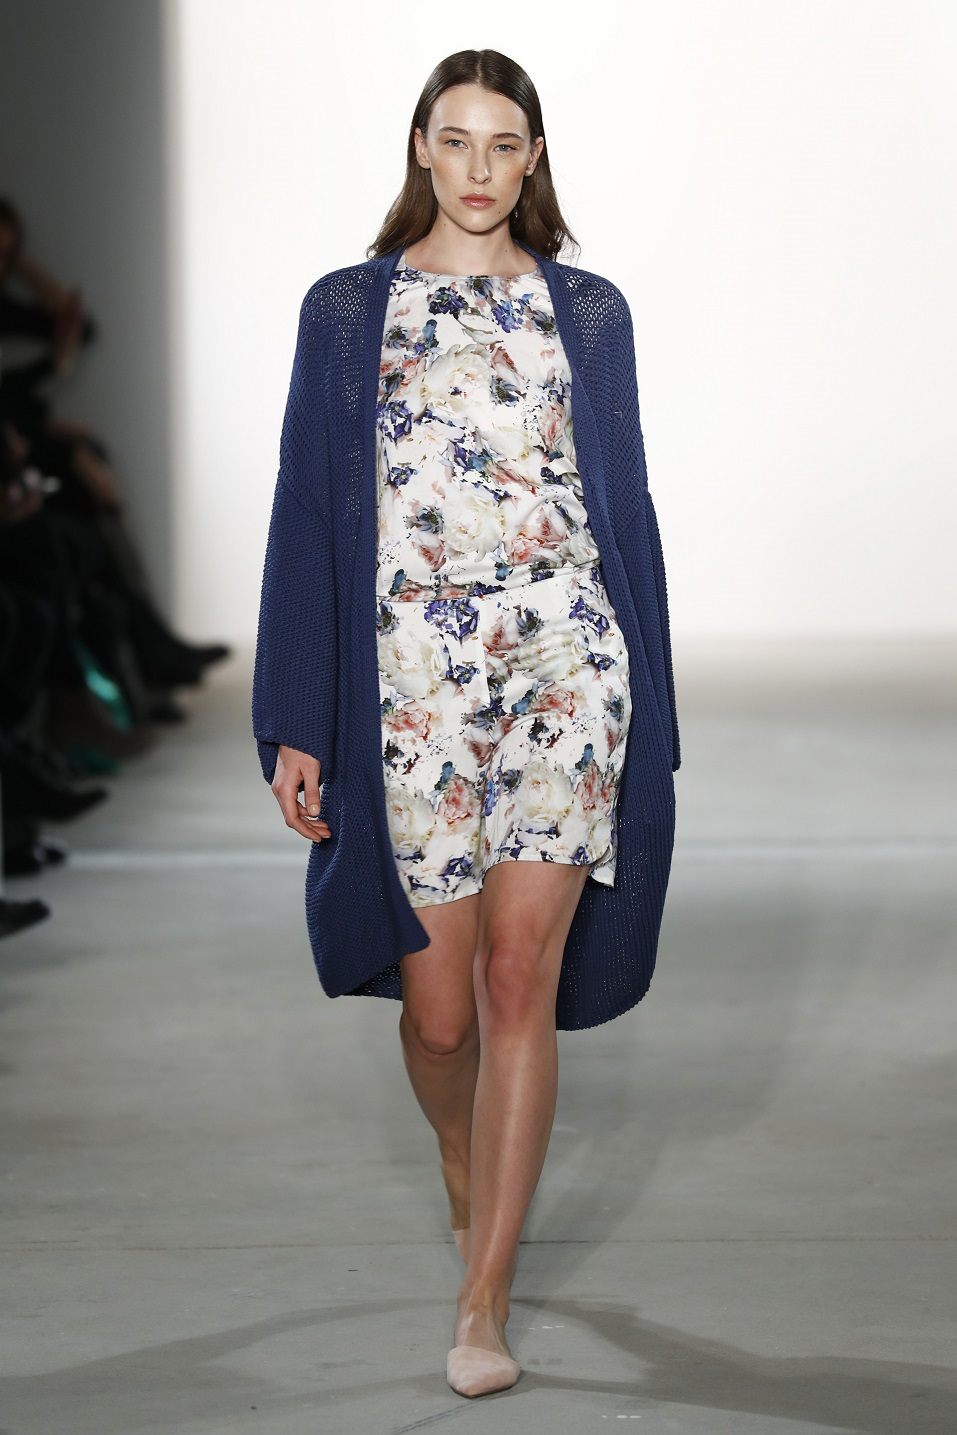 Style a Cardigan, Straight From the Runway